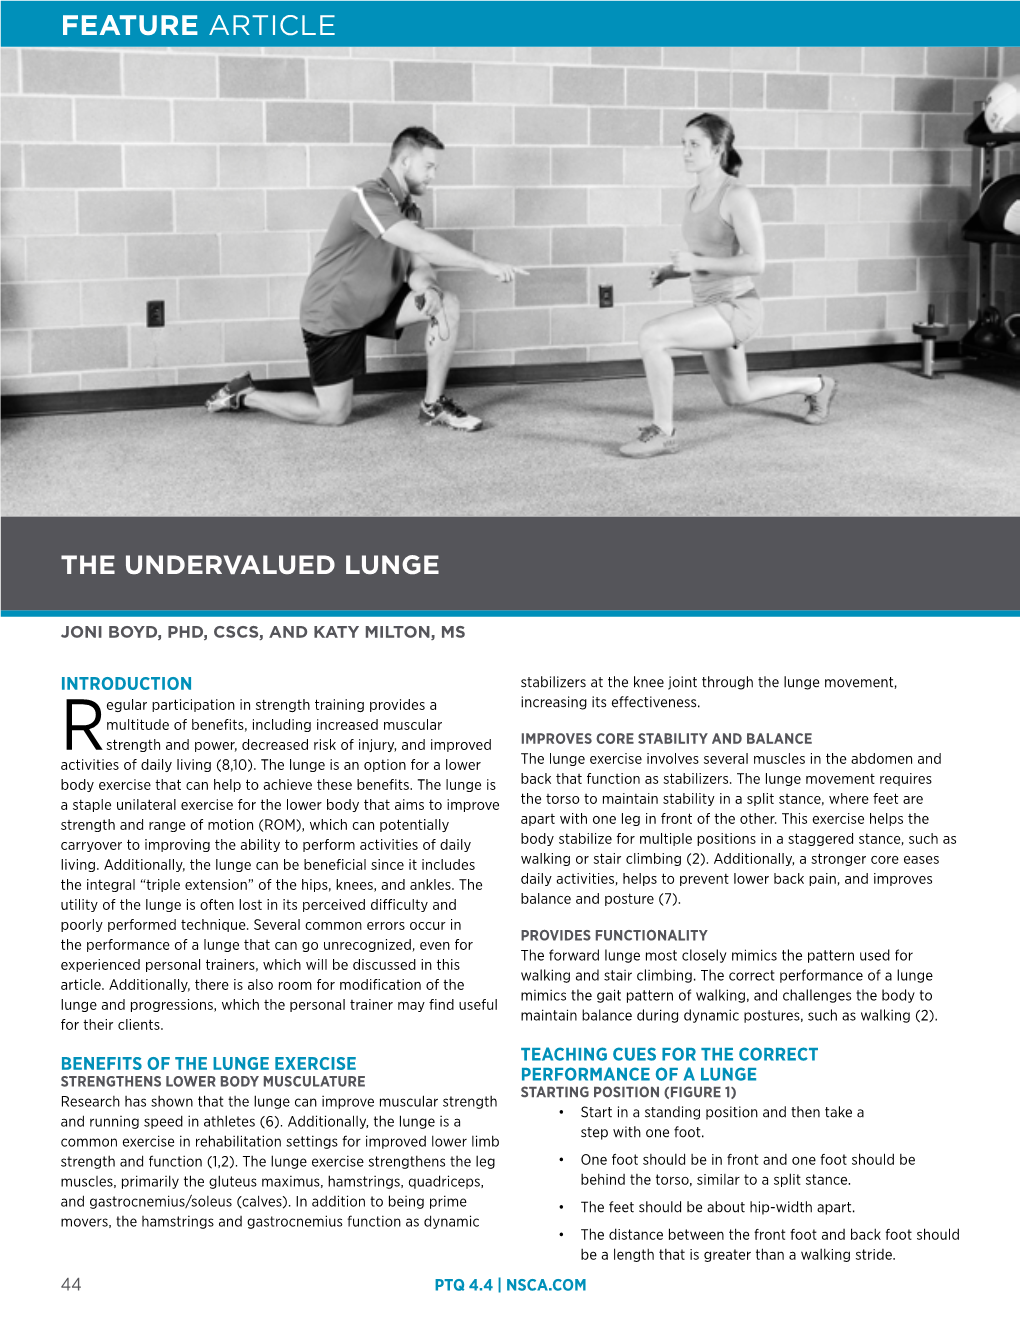 The Undervalued Lunge